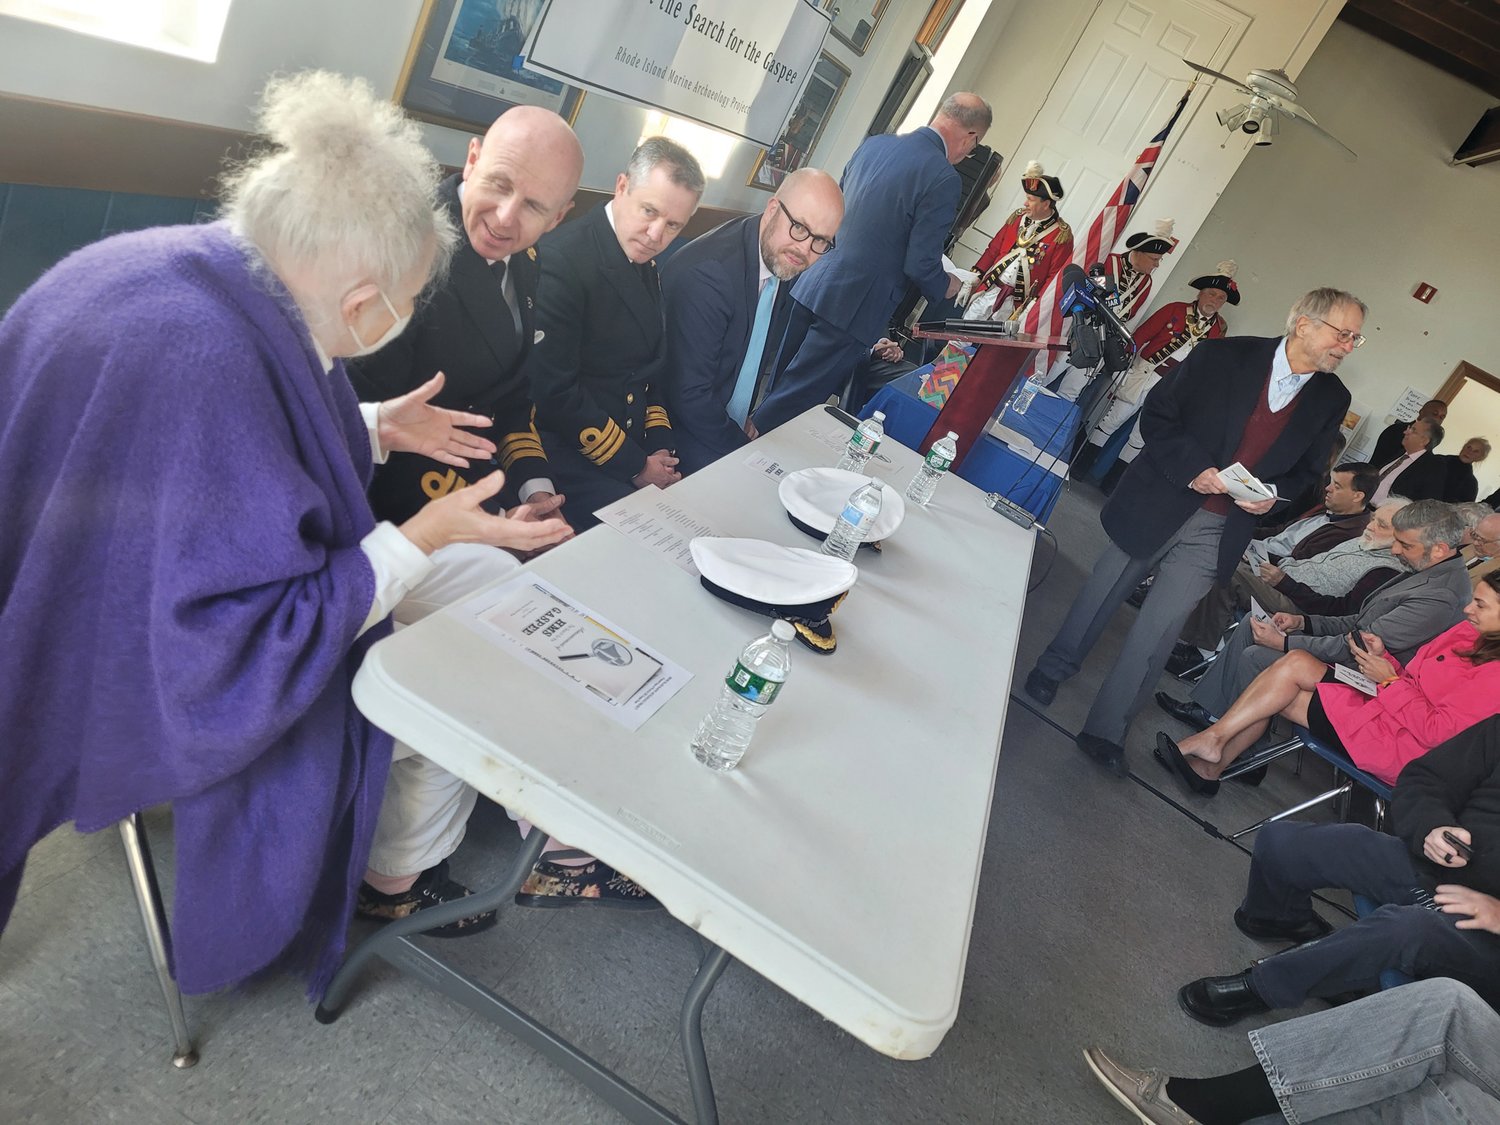 THE SEARCHERS: From left to right, Dr. Kathy Abbass, British Naval Commanders Steven White and Simon Rogers, Dr. Peter Abbott, state Rep. Joseph M. McNamara, the Pawtuxet Rangers, and Gaspee Days Committee board member Roger Hudson prepare for Tuesday morning’s announcement at the Aspray Boathouse in Pawtuxet Village. (Beacon photo by Rory Schuler)